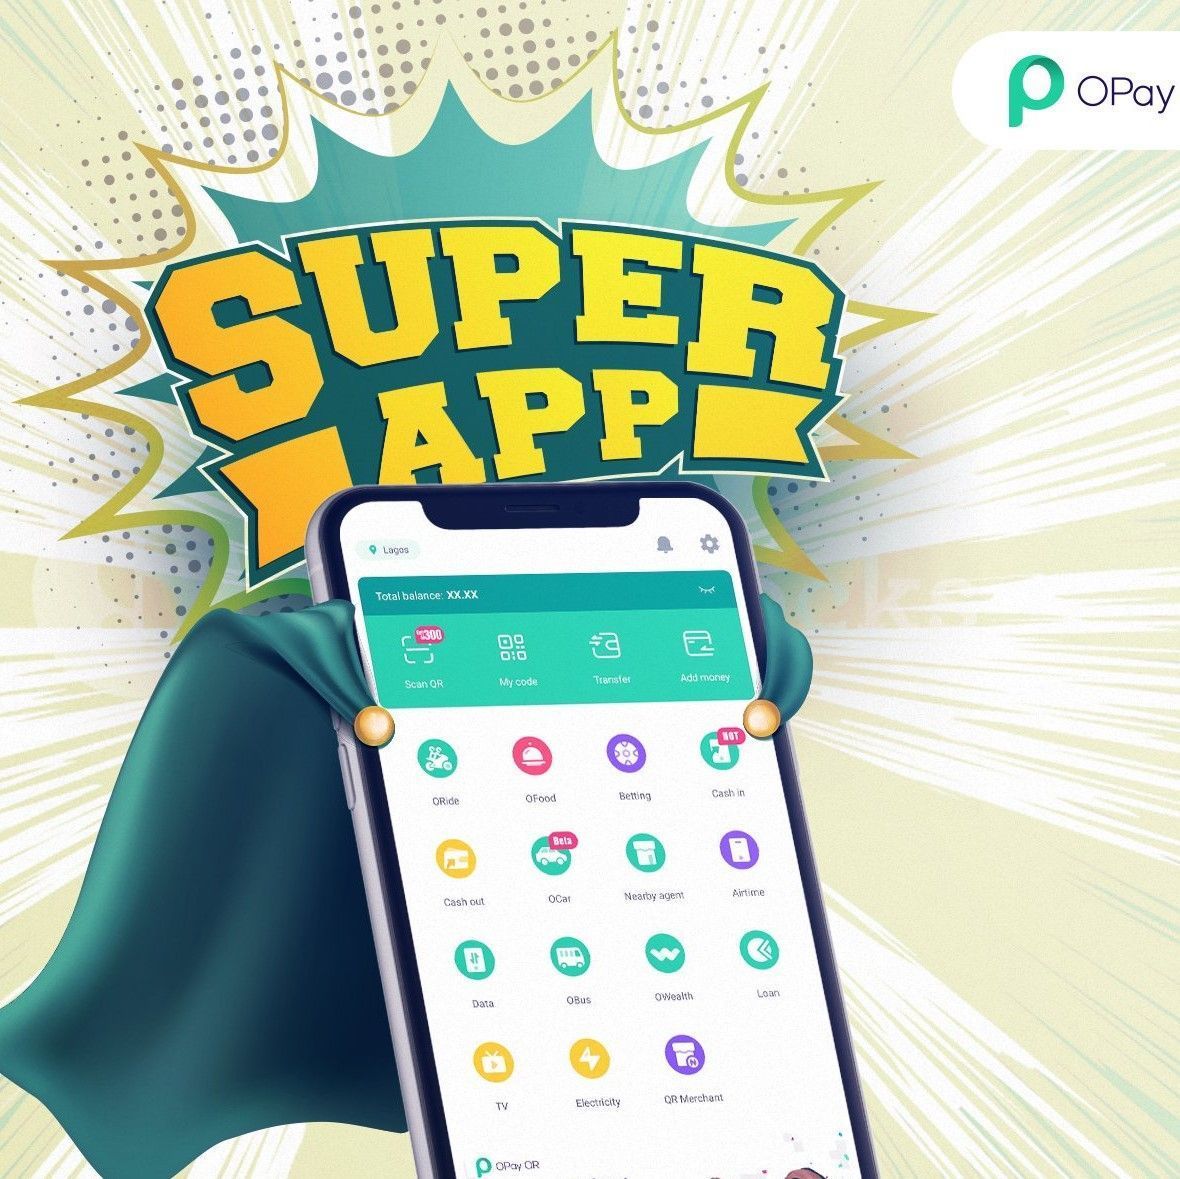 Why OPay launched another mobility service